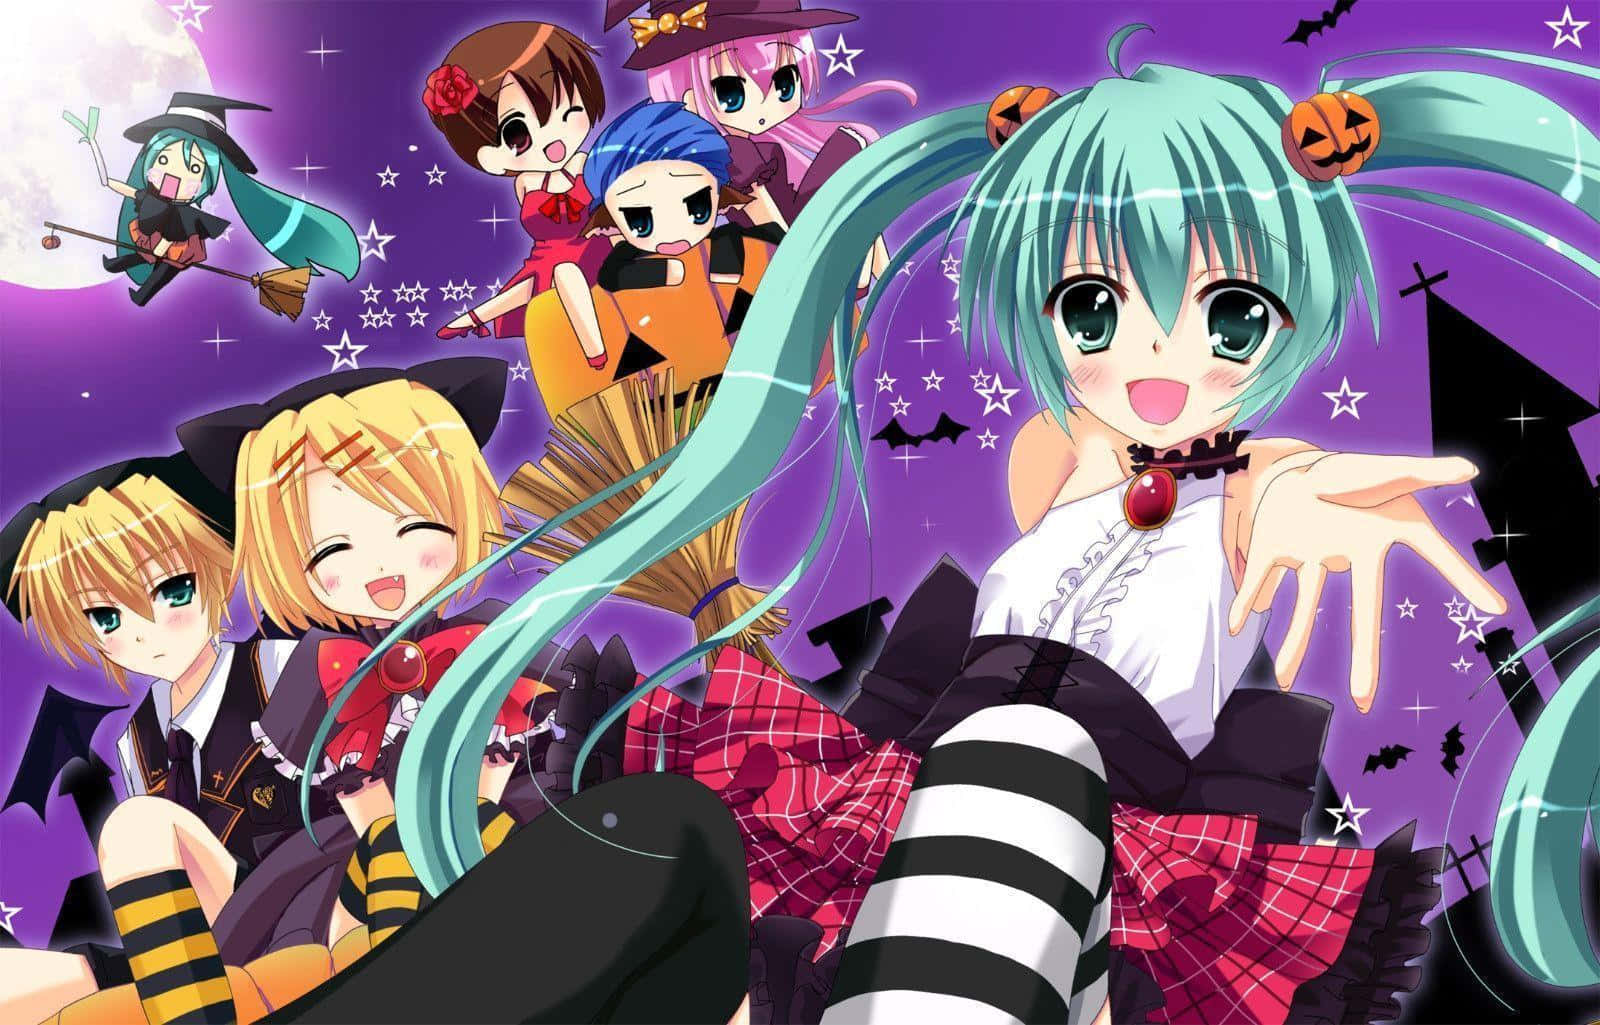 Halloween wallpaper with cute anime girls and hatsune miku in a witch costume - Animecore